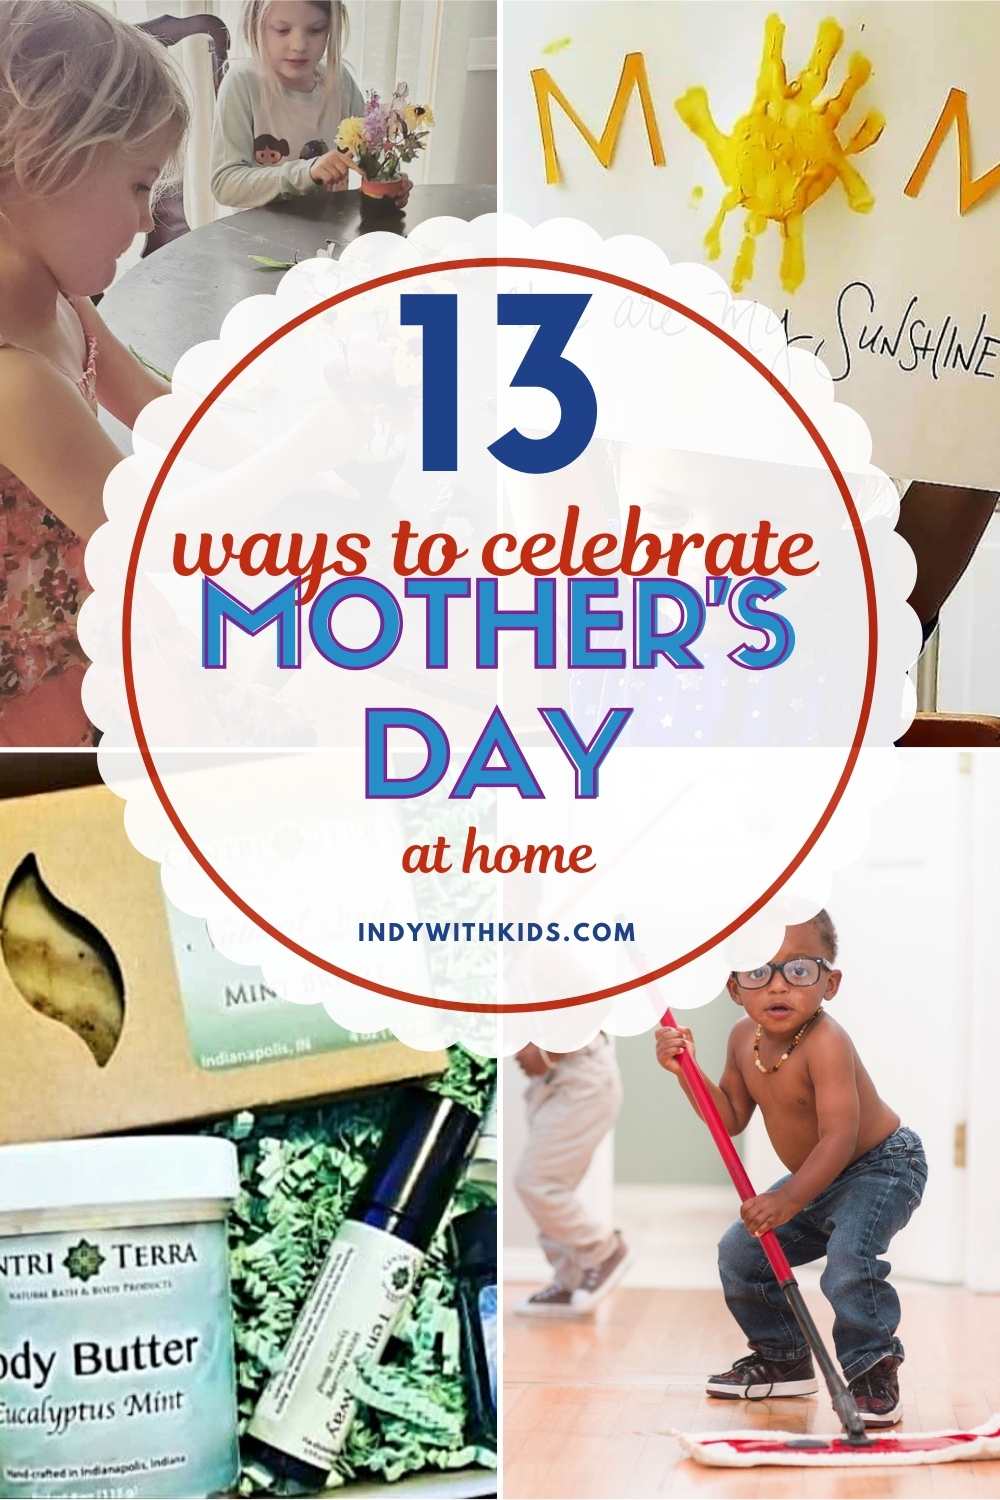 From a spa day to fingerpainted hand prints check out these fun ways to celebrate mothers day